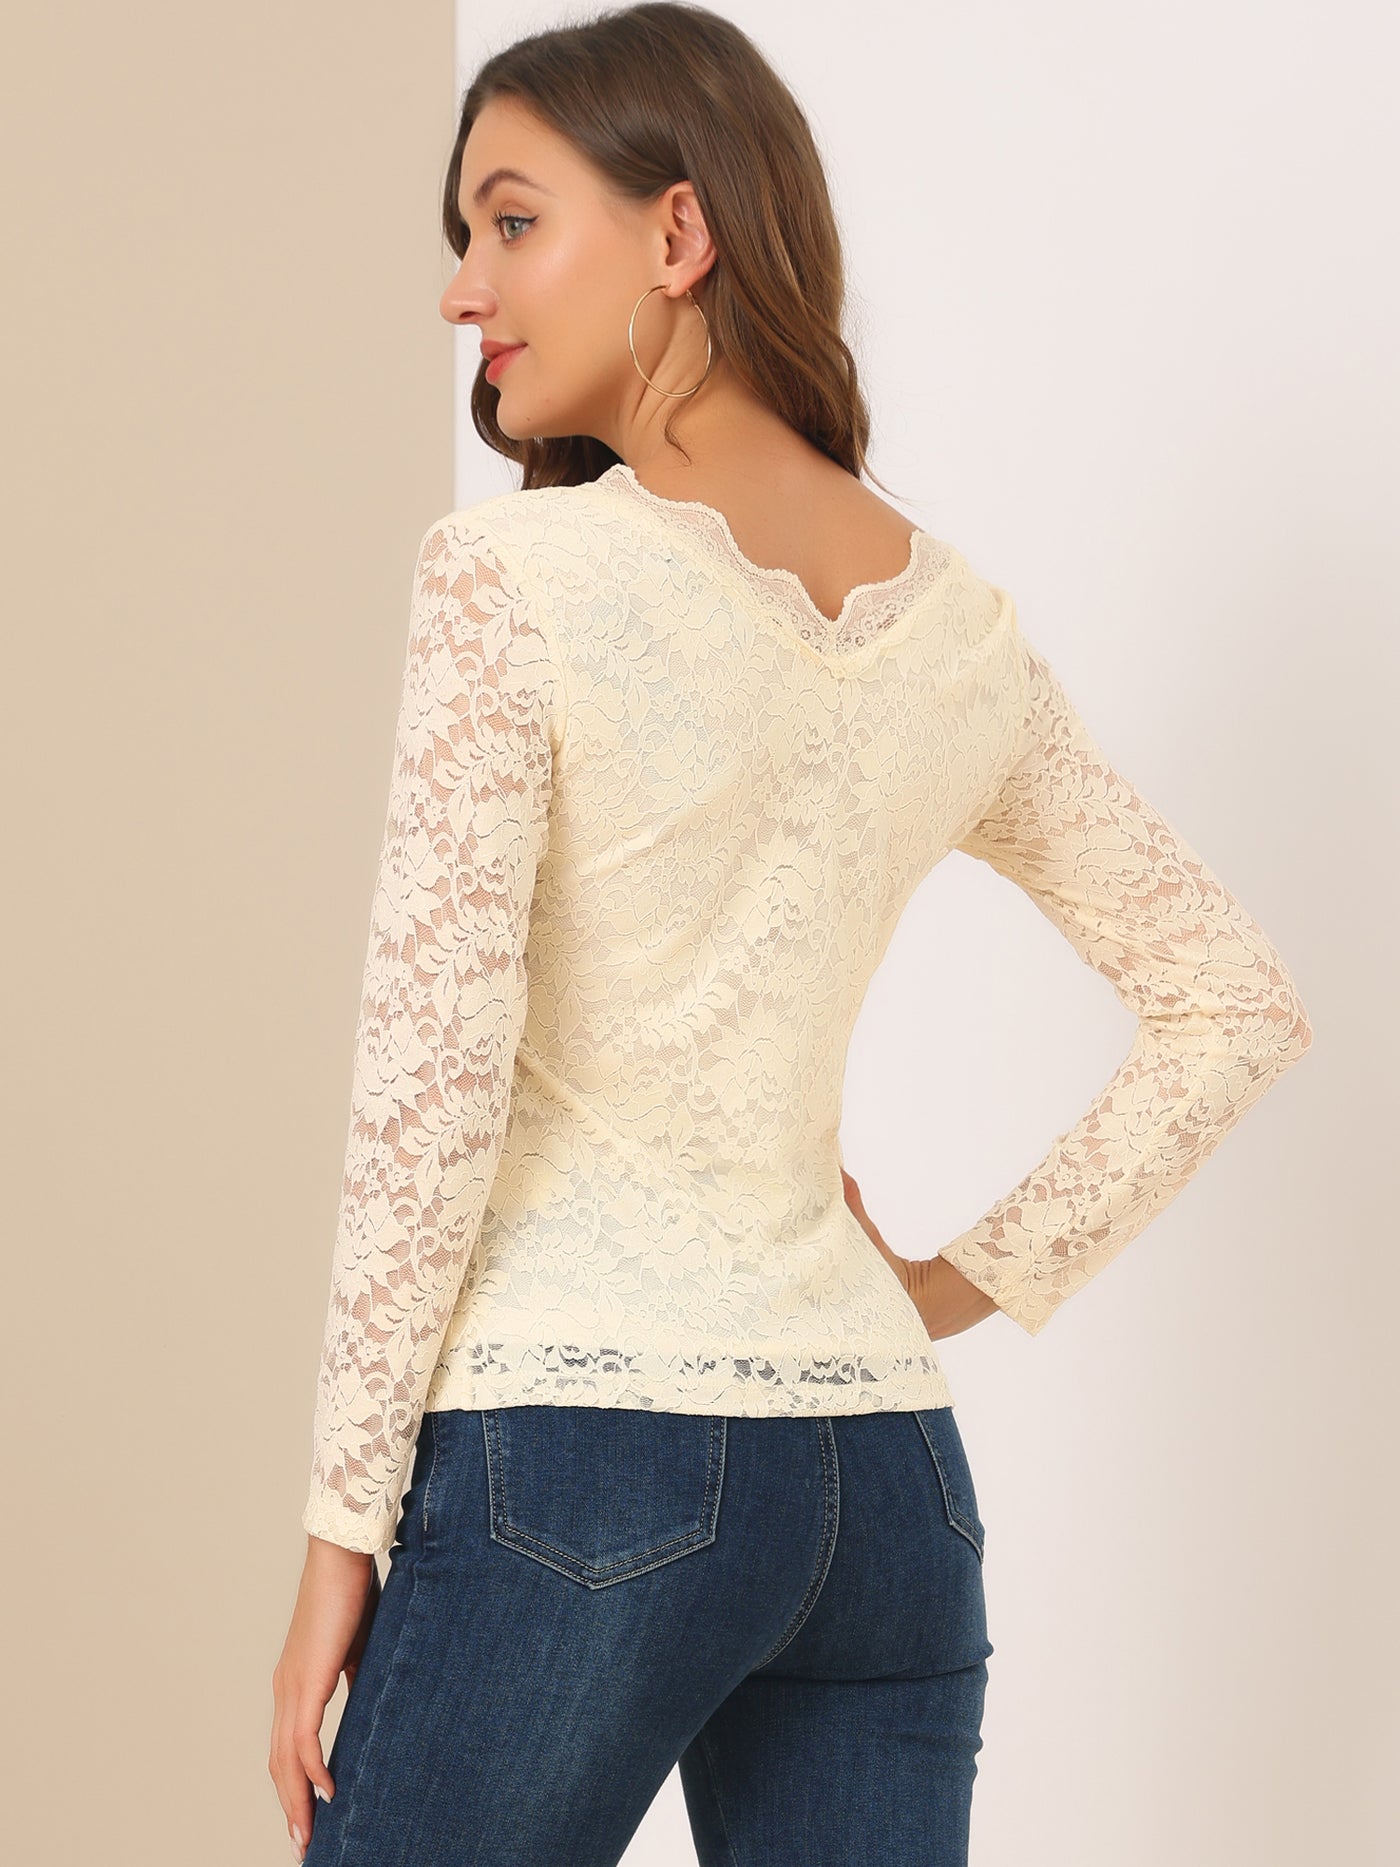 Allegra K Floral Embroidery Sheer Long Sleeve Lace Blouse Top